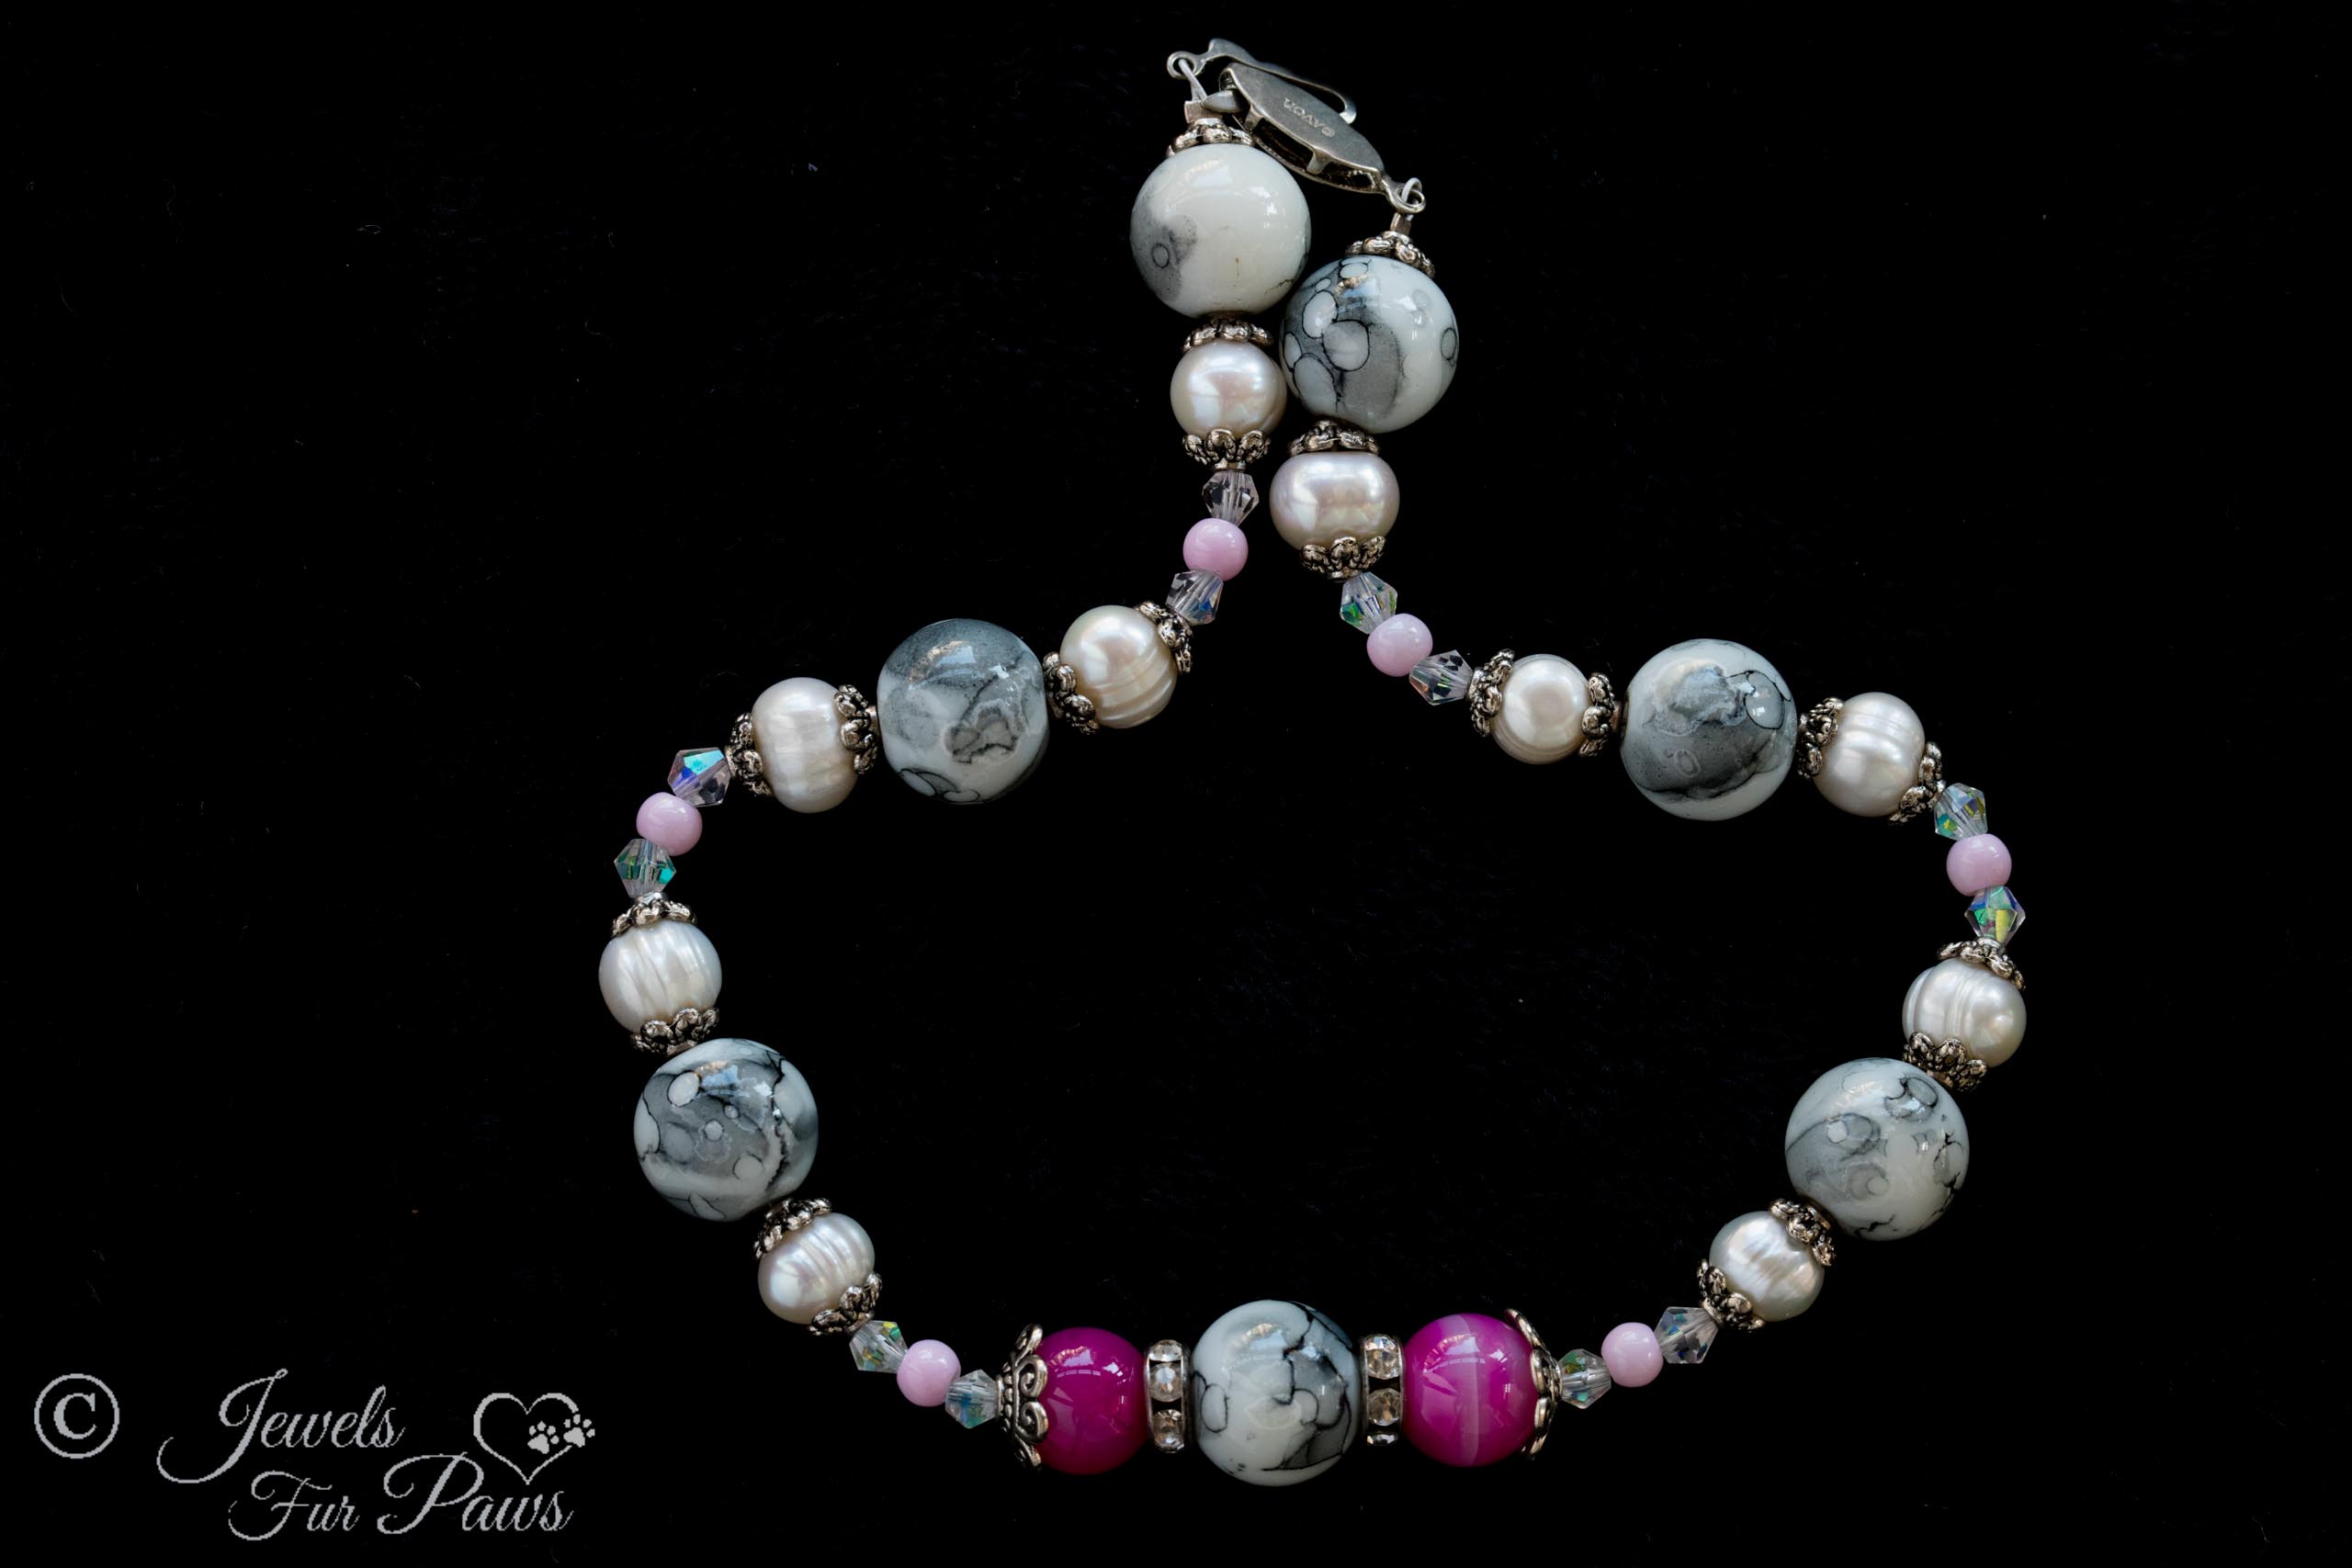 grey marbleized beads with two fuchsia beads, cultured pearls on black background for medium dog pet necklaces pet jewelry